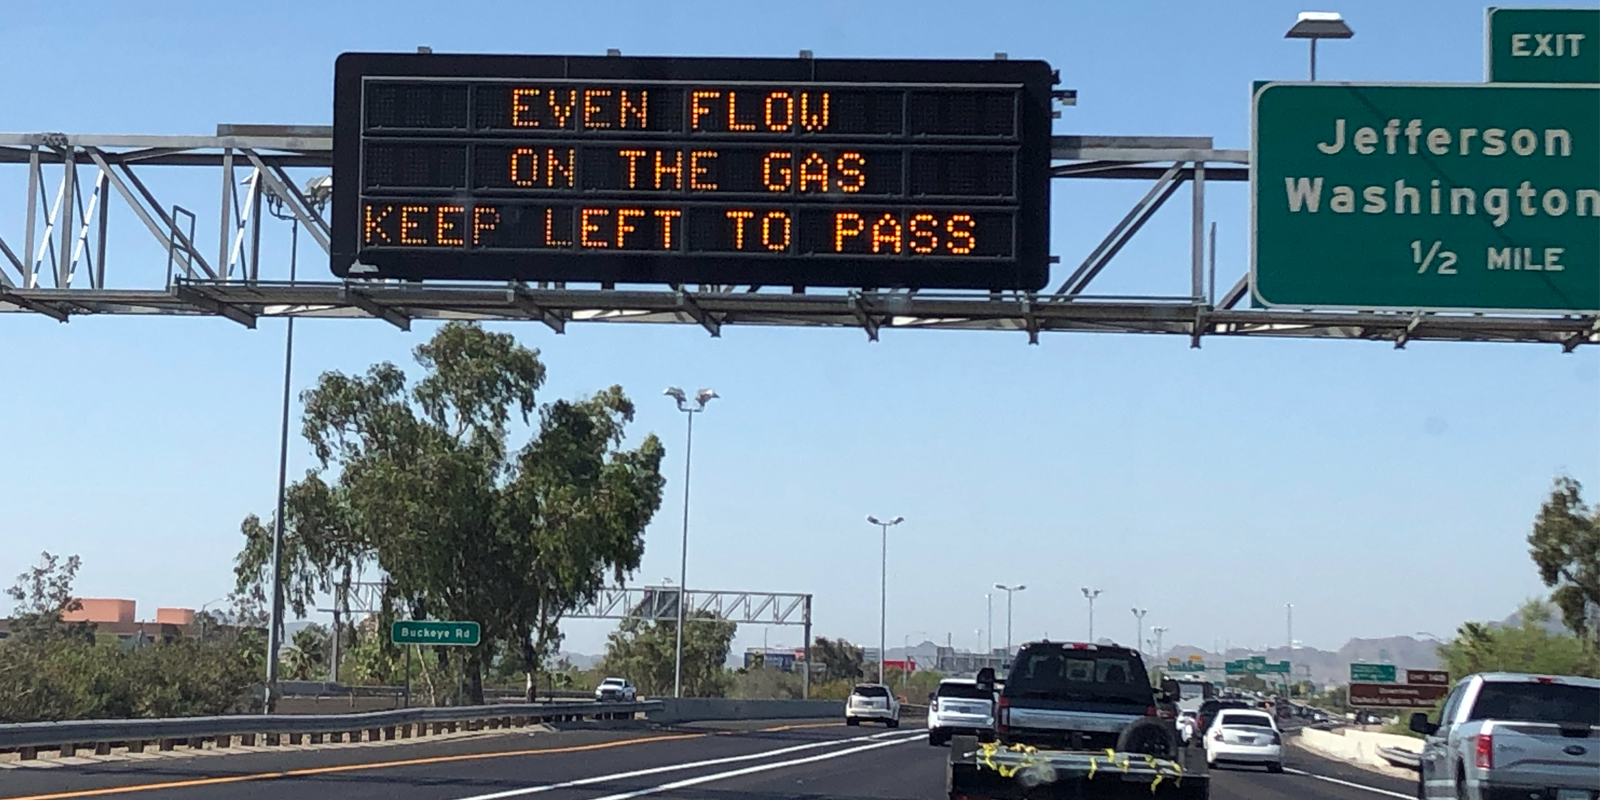 EVEN FLOW ON THE GAS KEEP LEFT TO PASS